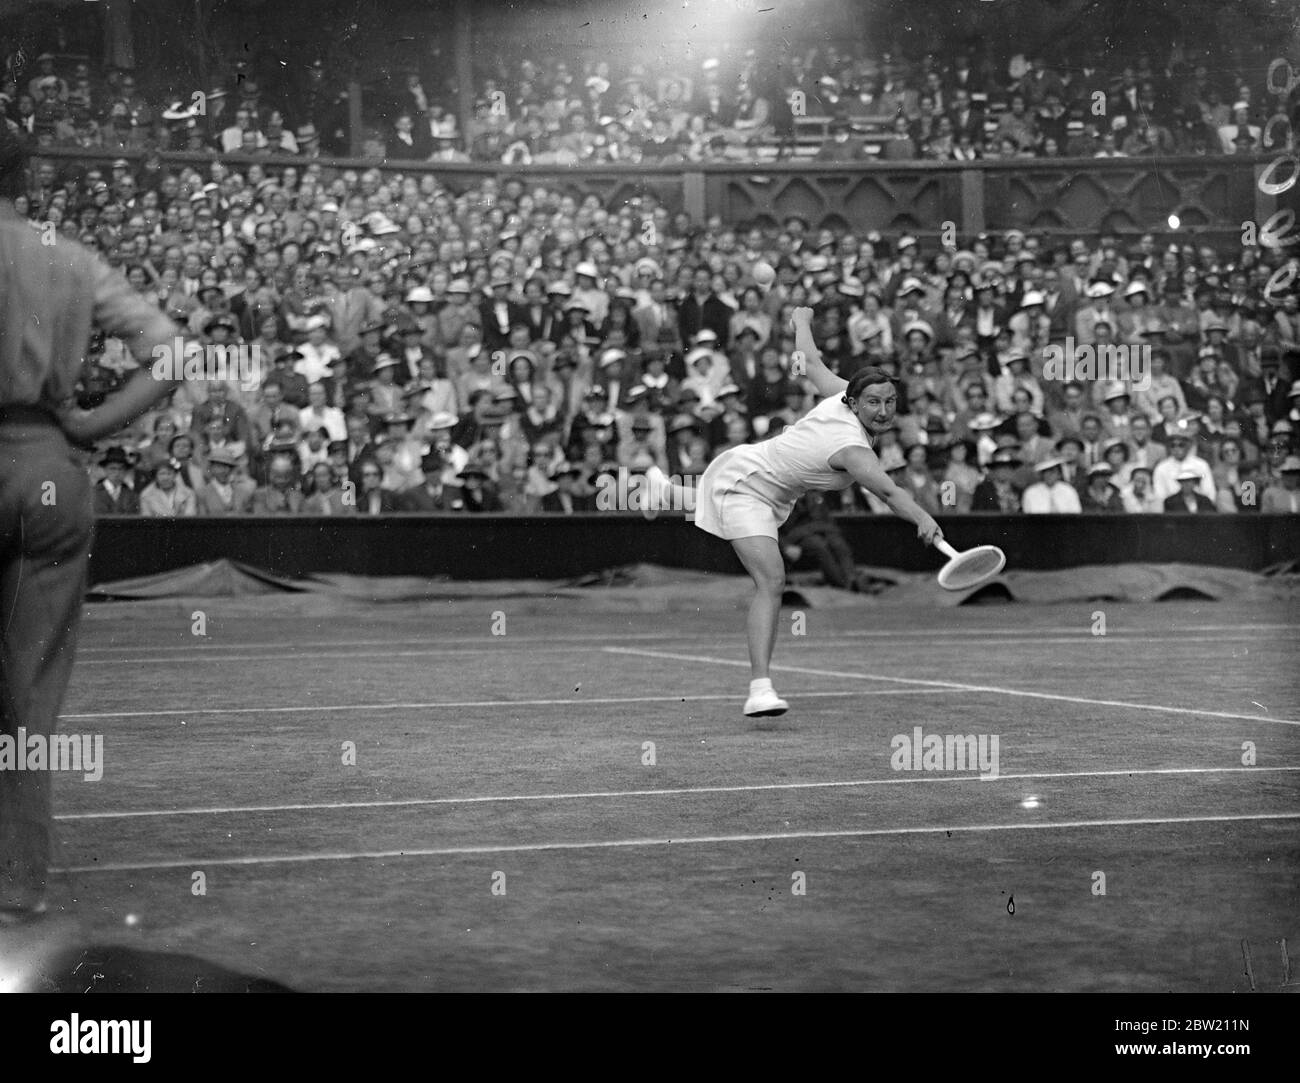 Miss Dorothy Round of Great Britain, defeated Miss Helen Jacobs, the champion, 6-4, 6-2 in the women's singles at Wimbledon. Miss Dorothy Round in play against Miss Helen Jacobs on the Centre Court. 29 June 1937 Stock Photo